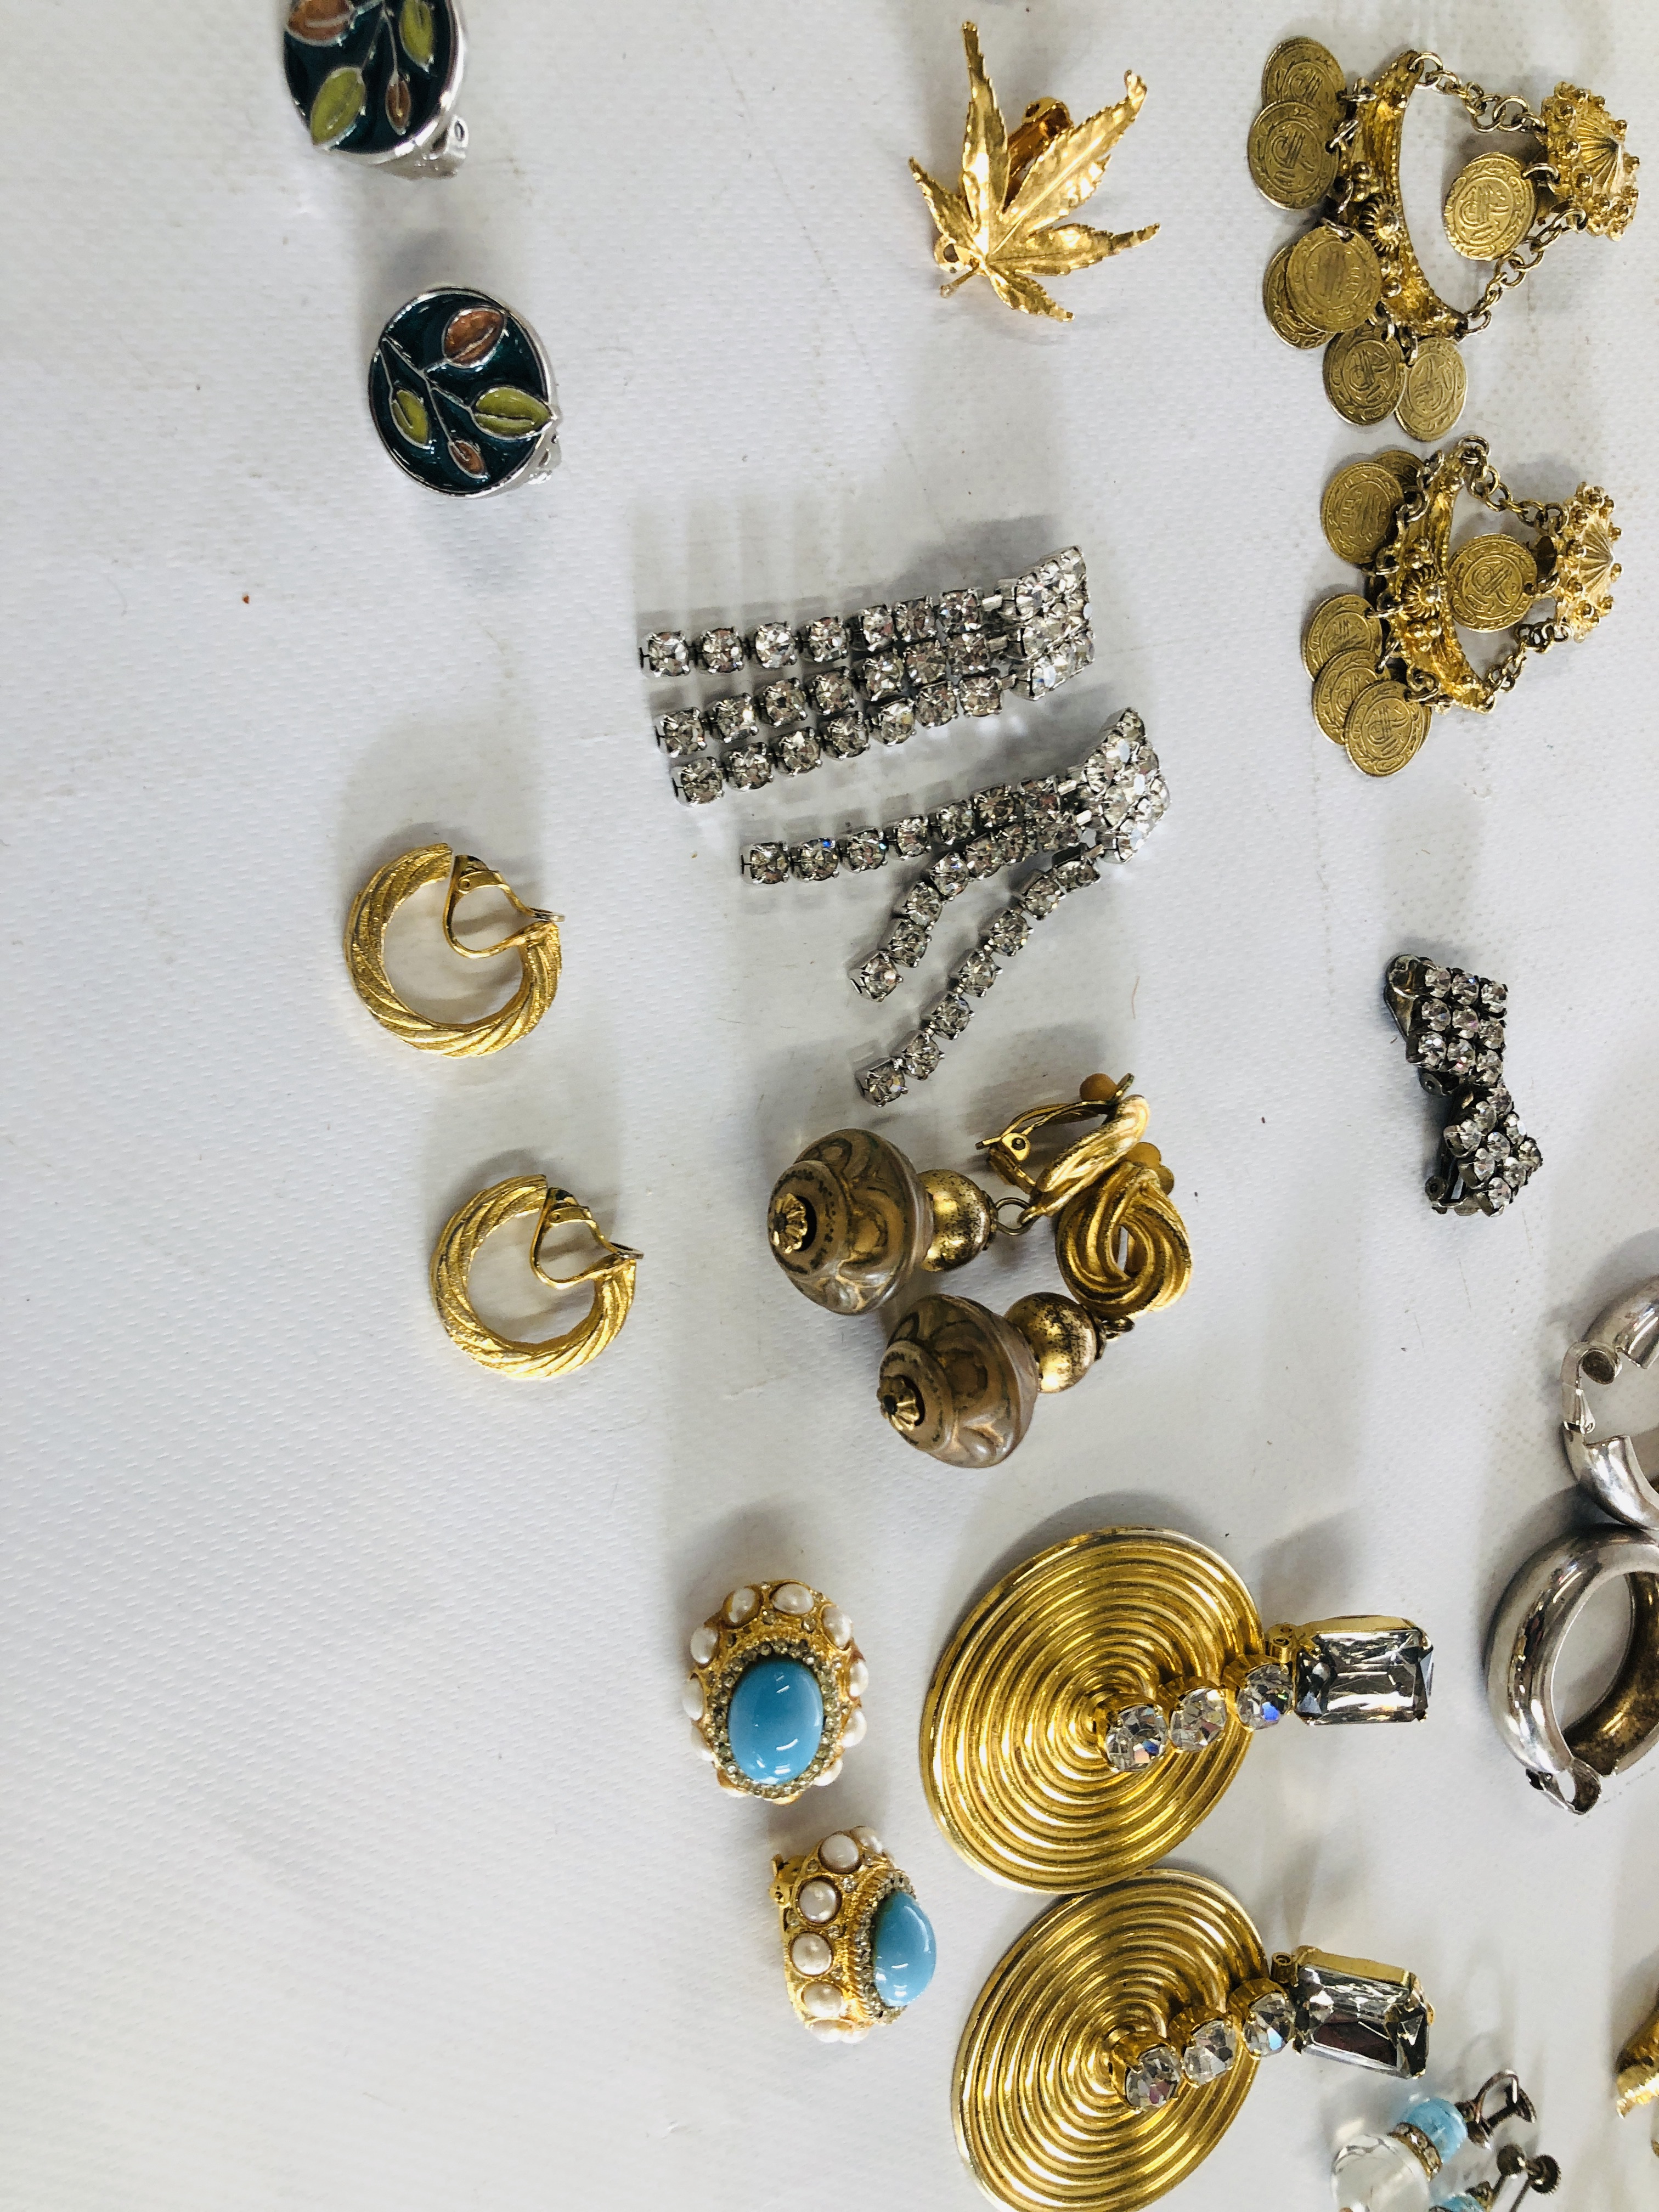 40 PAIRS OF VARIOUS CLIP ON COSTUME JEWELLERY EARRINGS. - Image 7 of 9